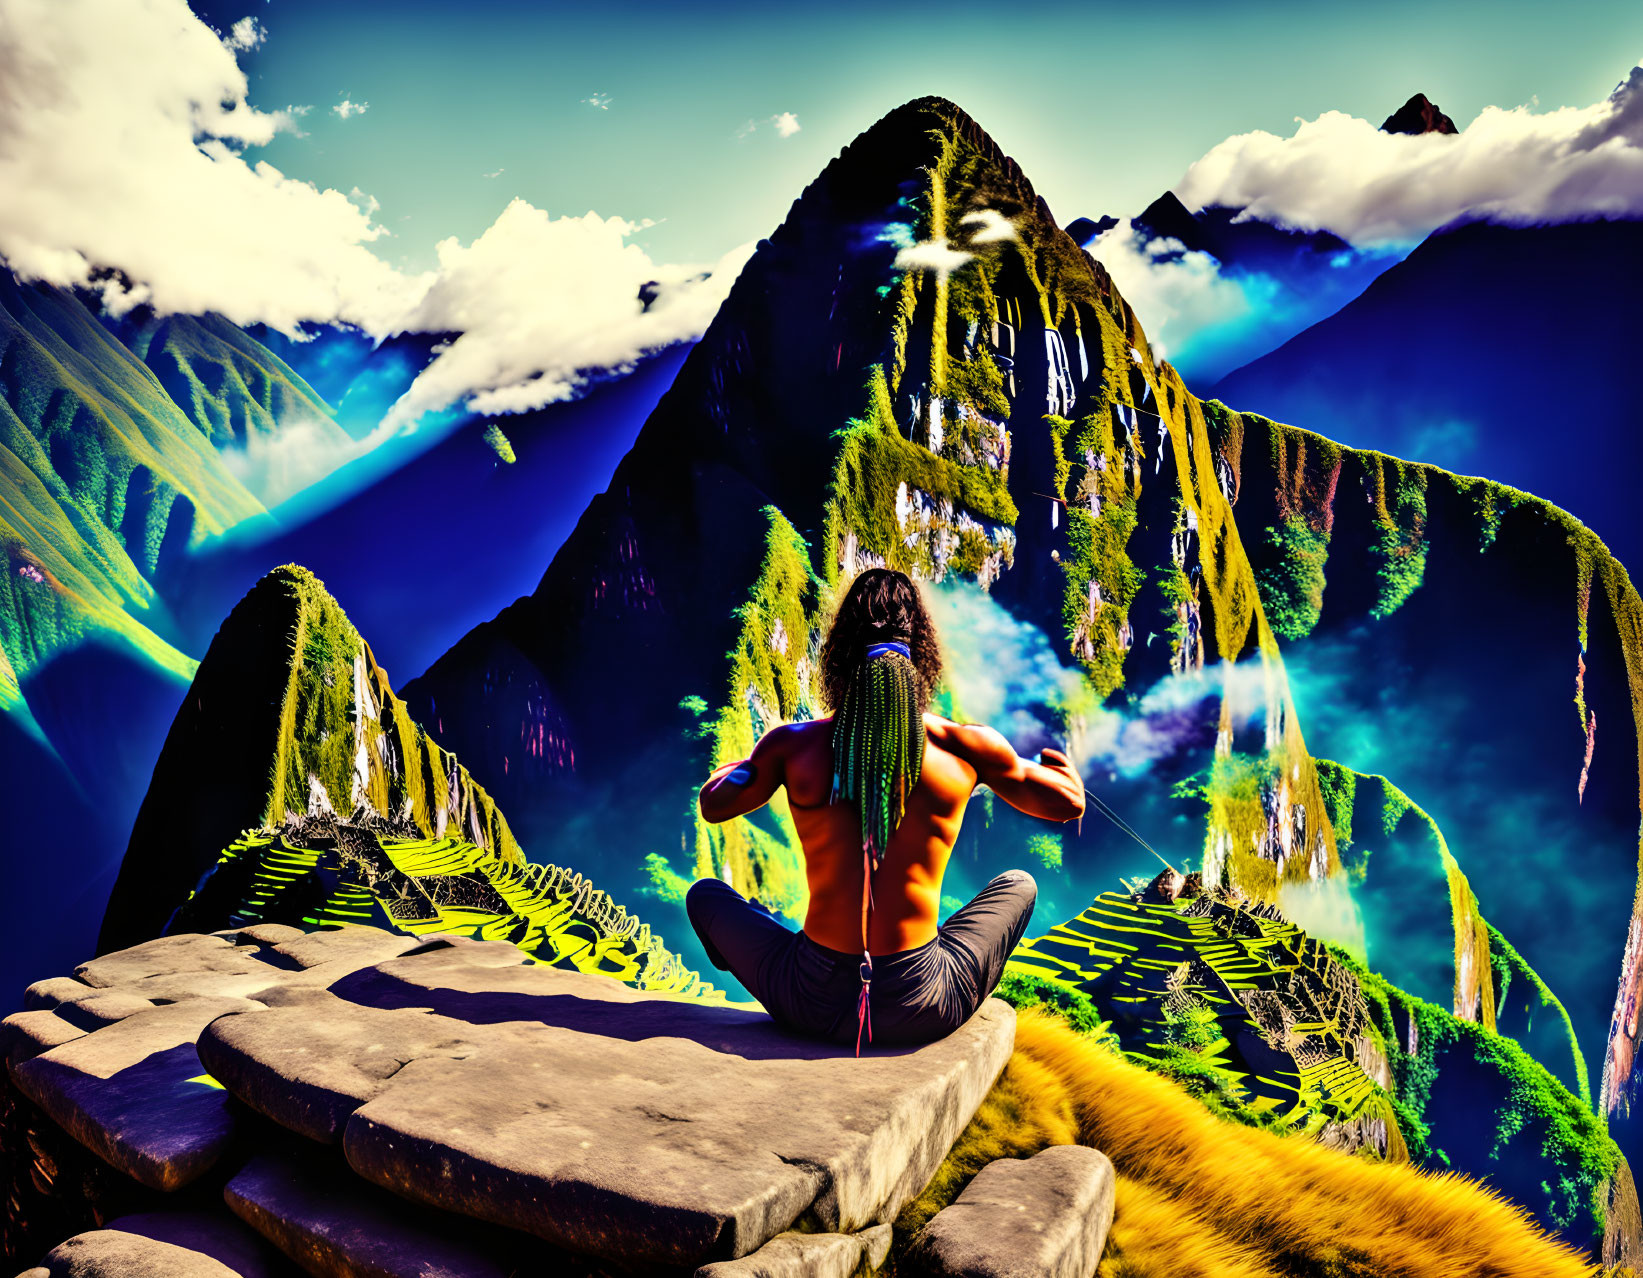 Person meditating on mountain ledge with stunning landscape view